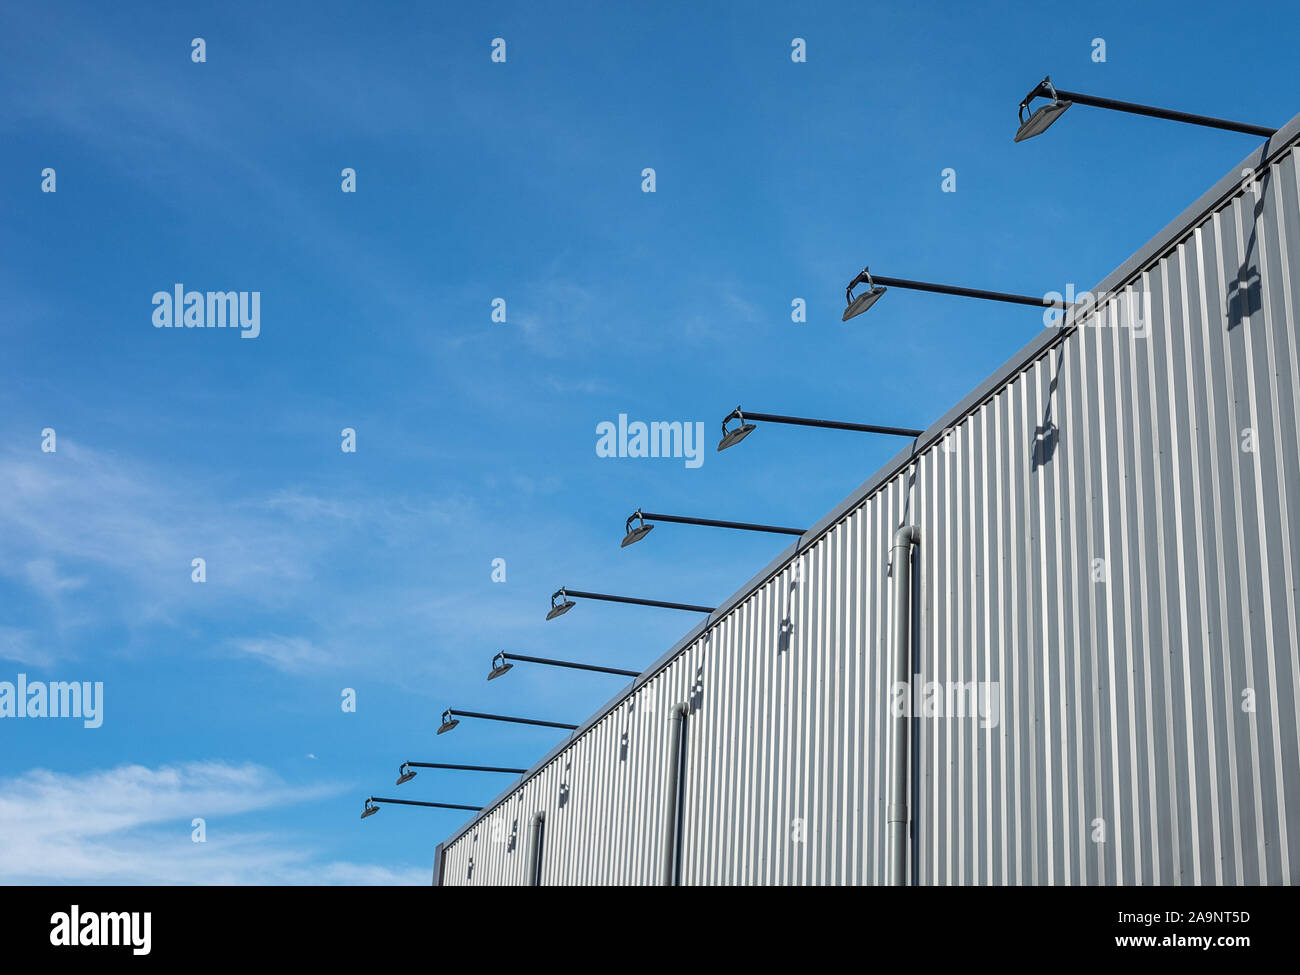 Street architecture outdoor lamp hanged and cantilevered from the wall of the building which is metal sheet with blue sky background. Stock Photo